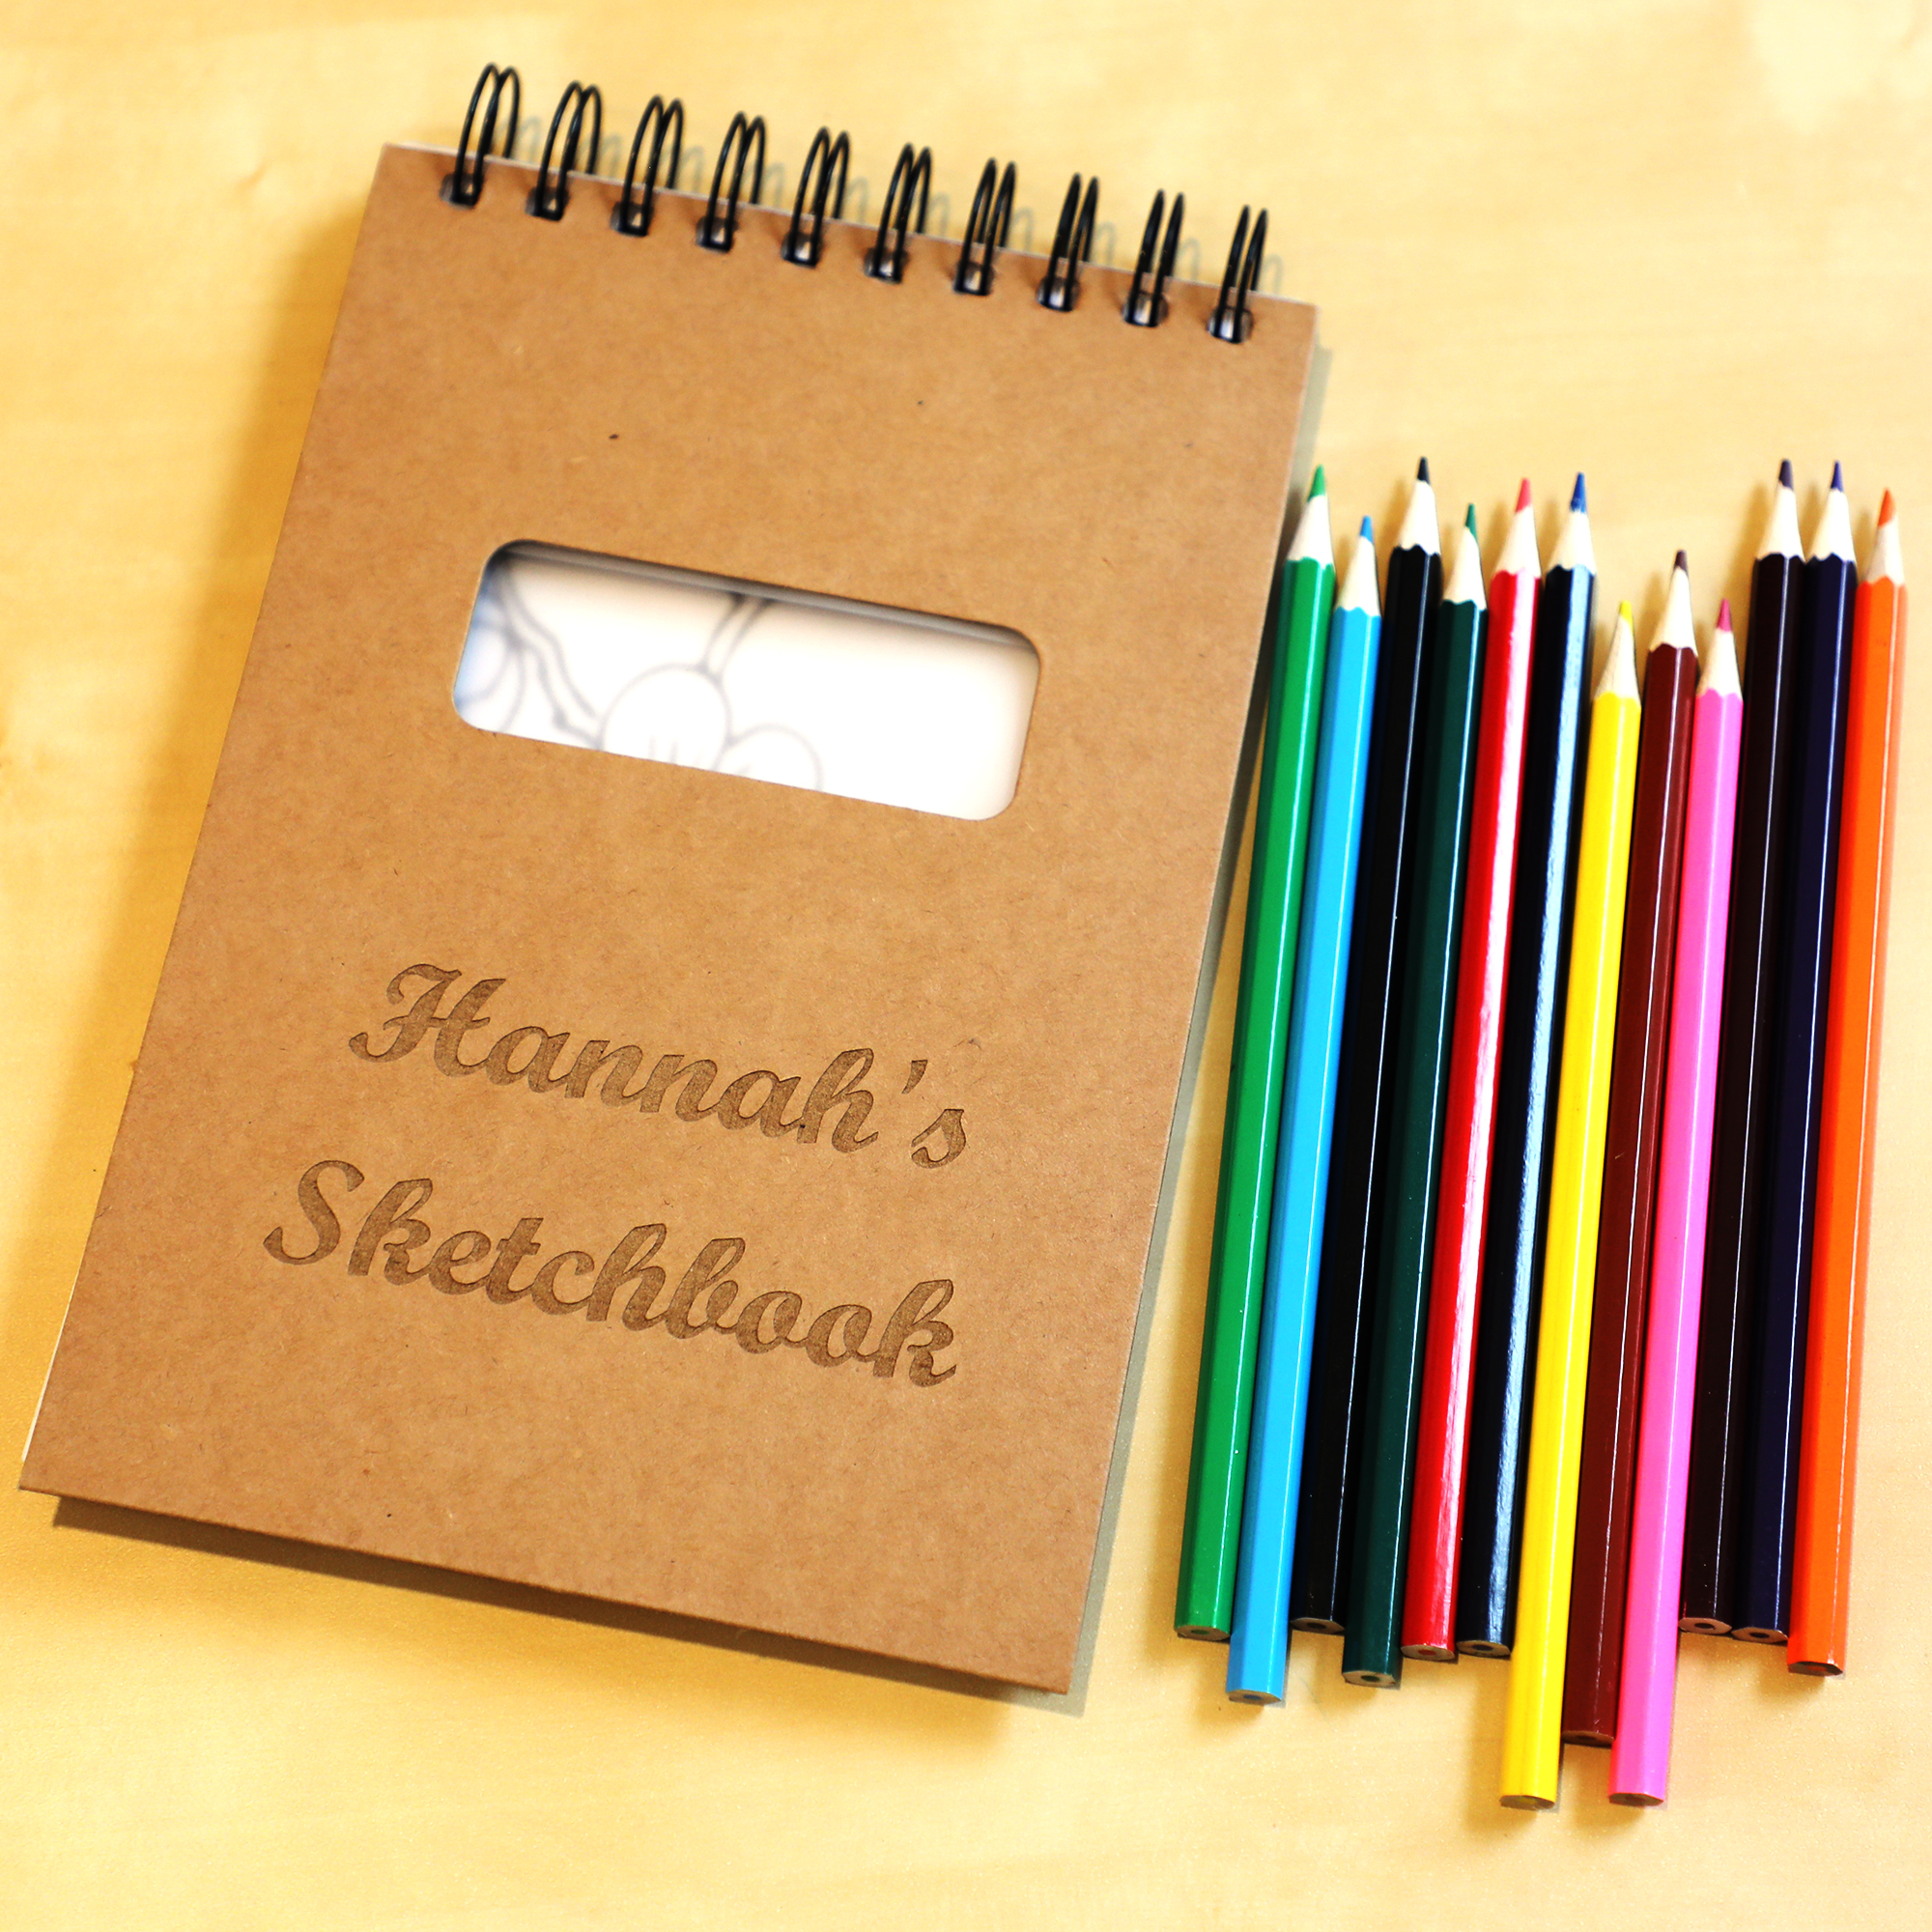 Personalized Sketch Pad – A Gift Personalized